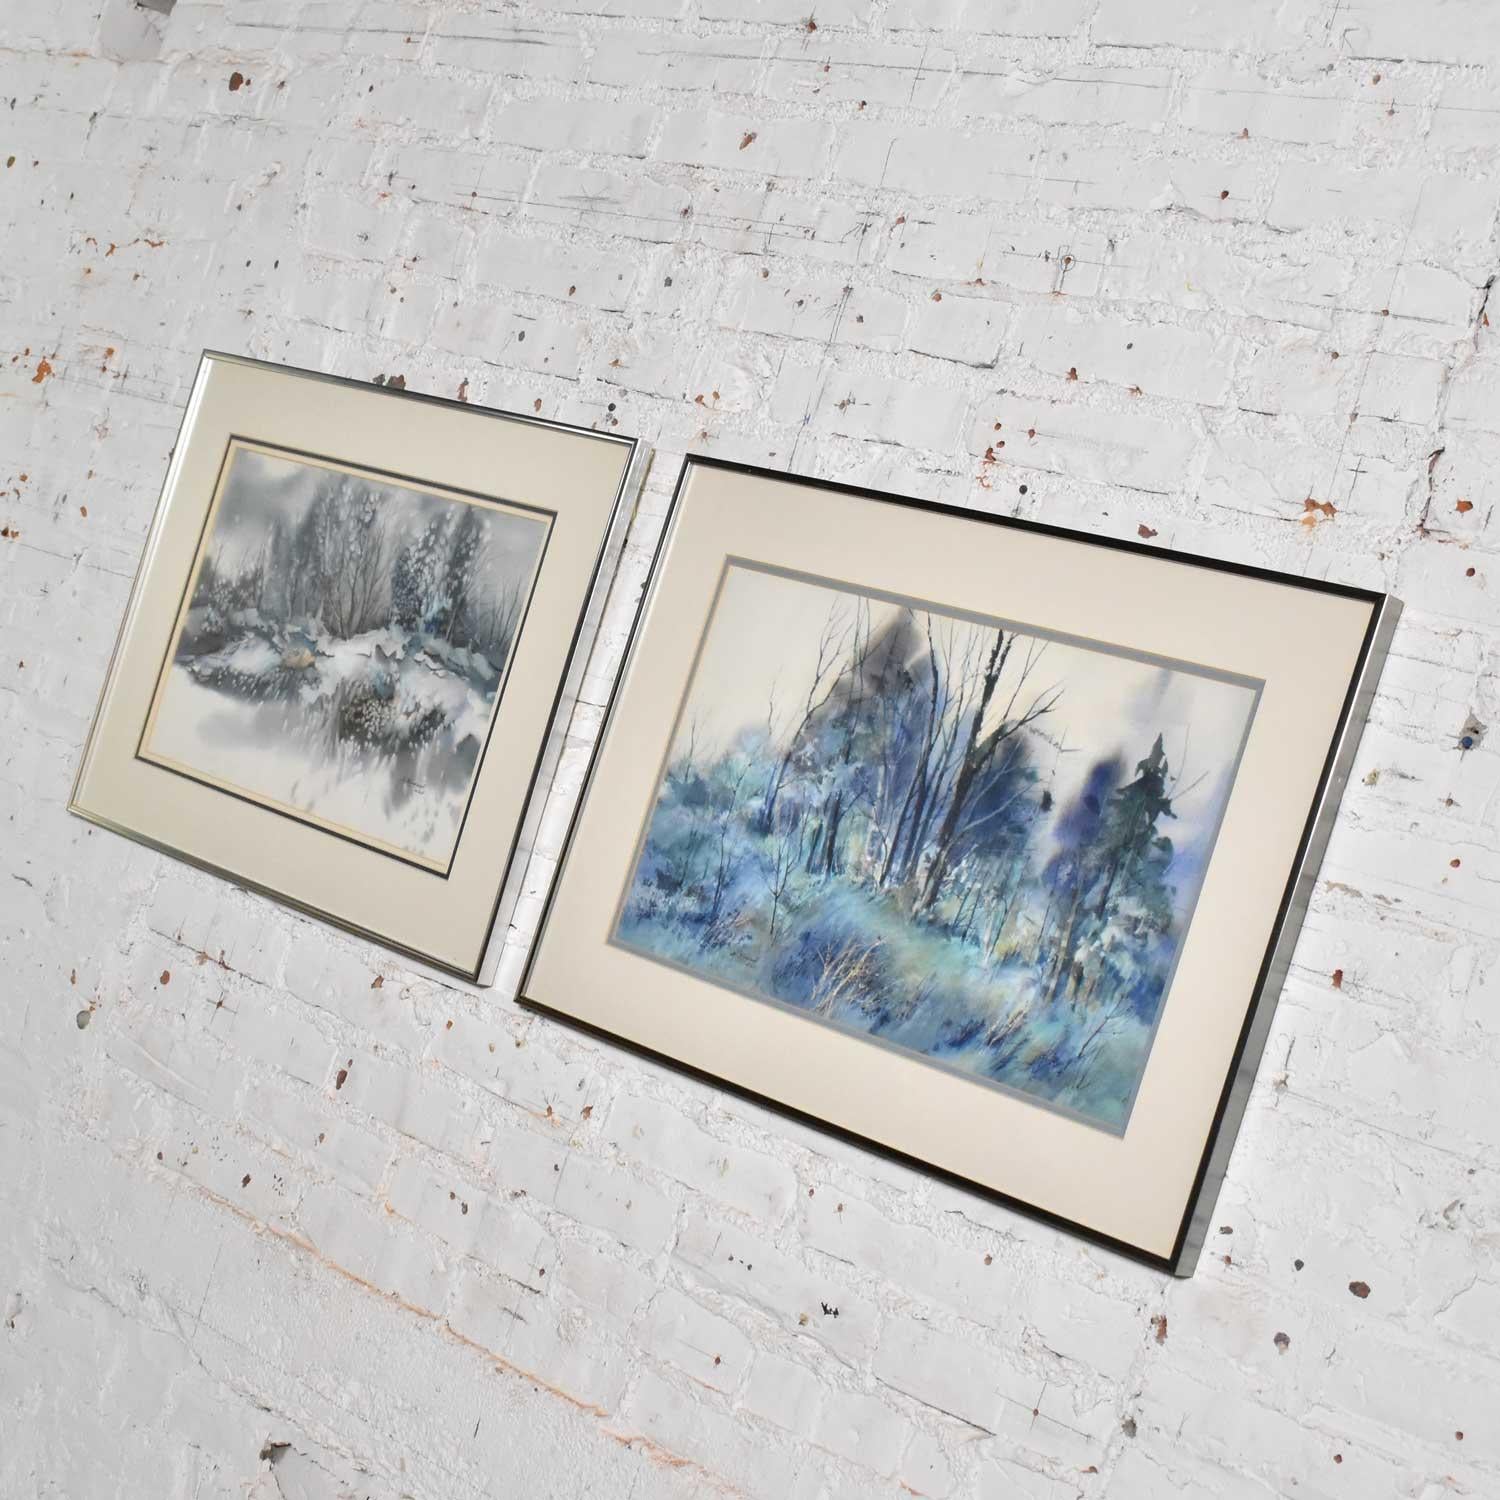 Handsome pair of watercolor paintings each depicting a different winter landscape by Dorothy M. Reece Kordash. They are in wonderful vintage condition and in their original frames. Please see photos, circa 1970s-1980s.

Wow! We are proud to be